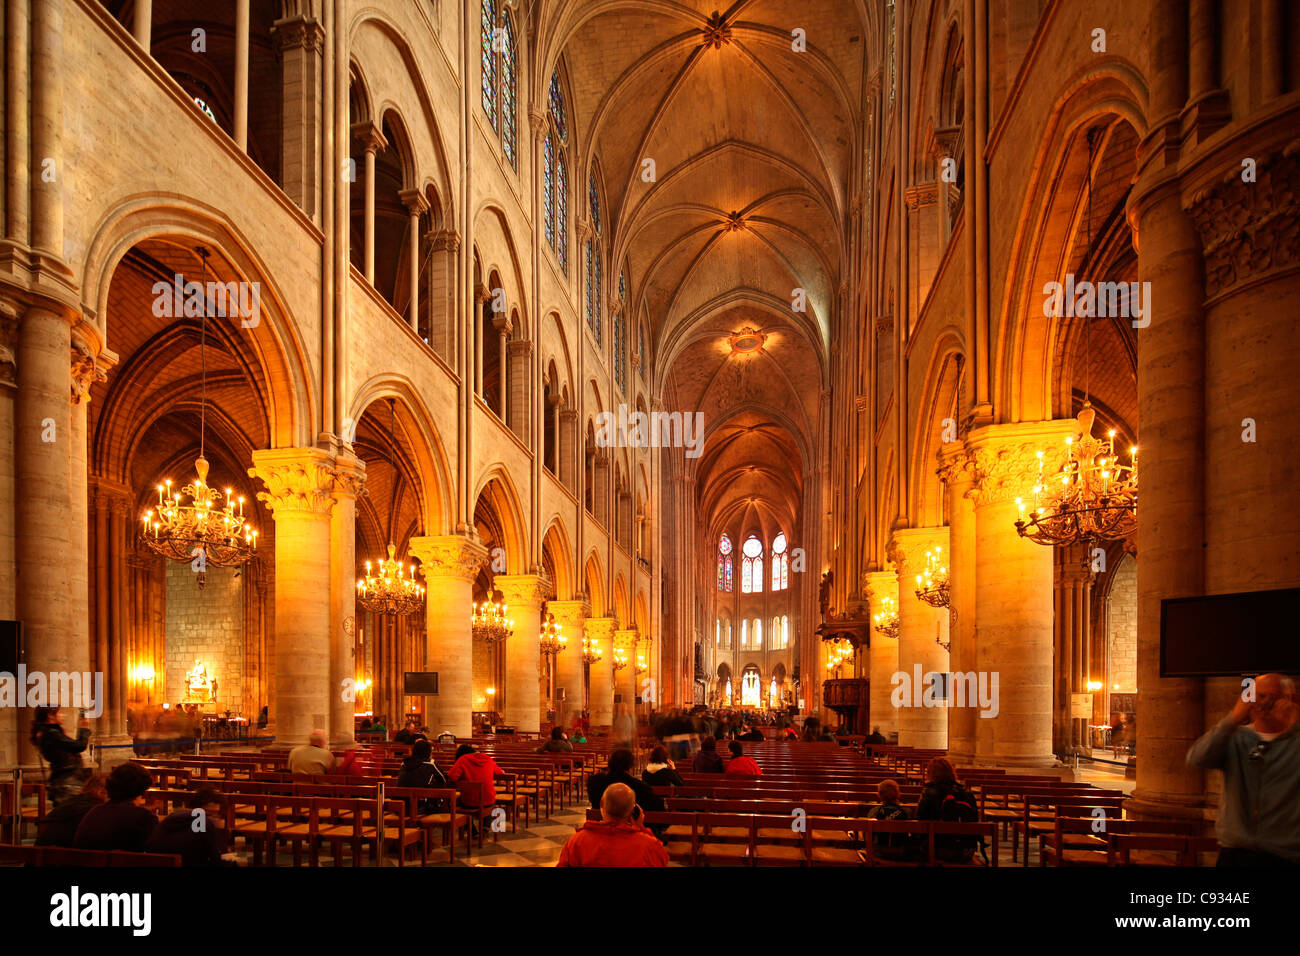 The famous cathedral of Notre Dame in Paris, France Stock Photo